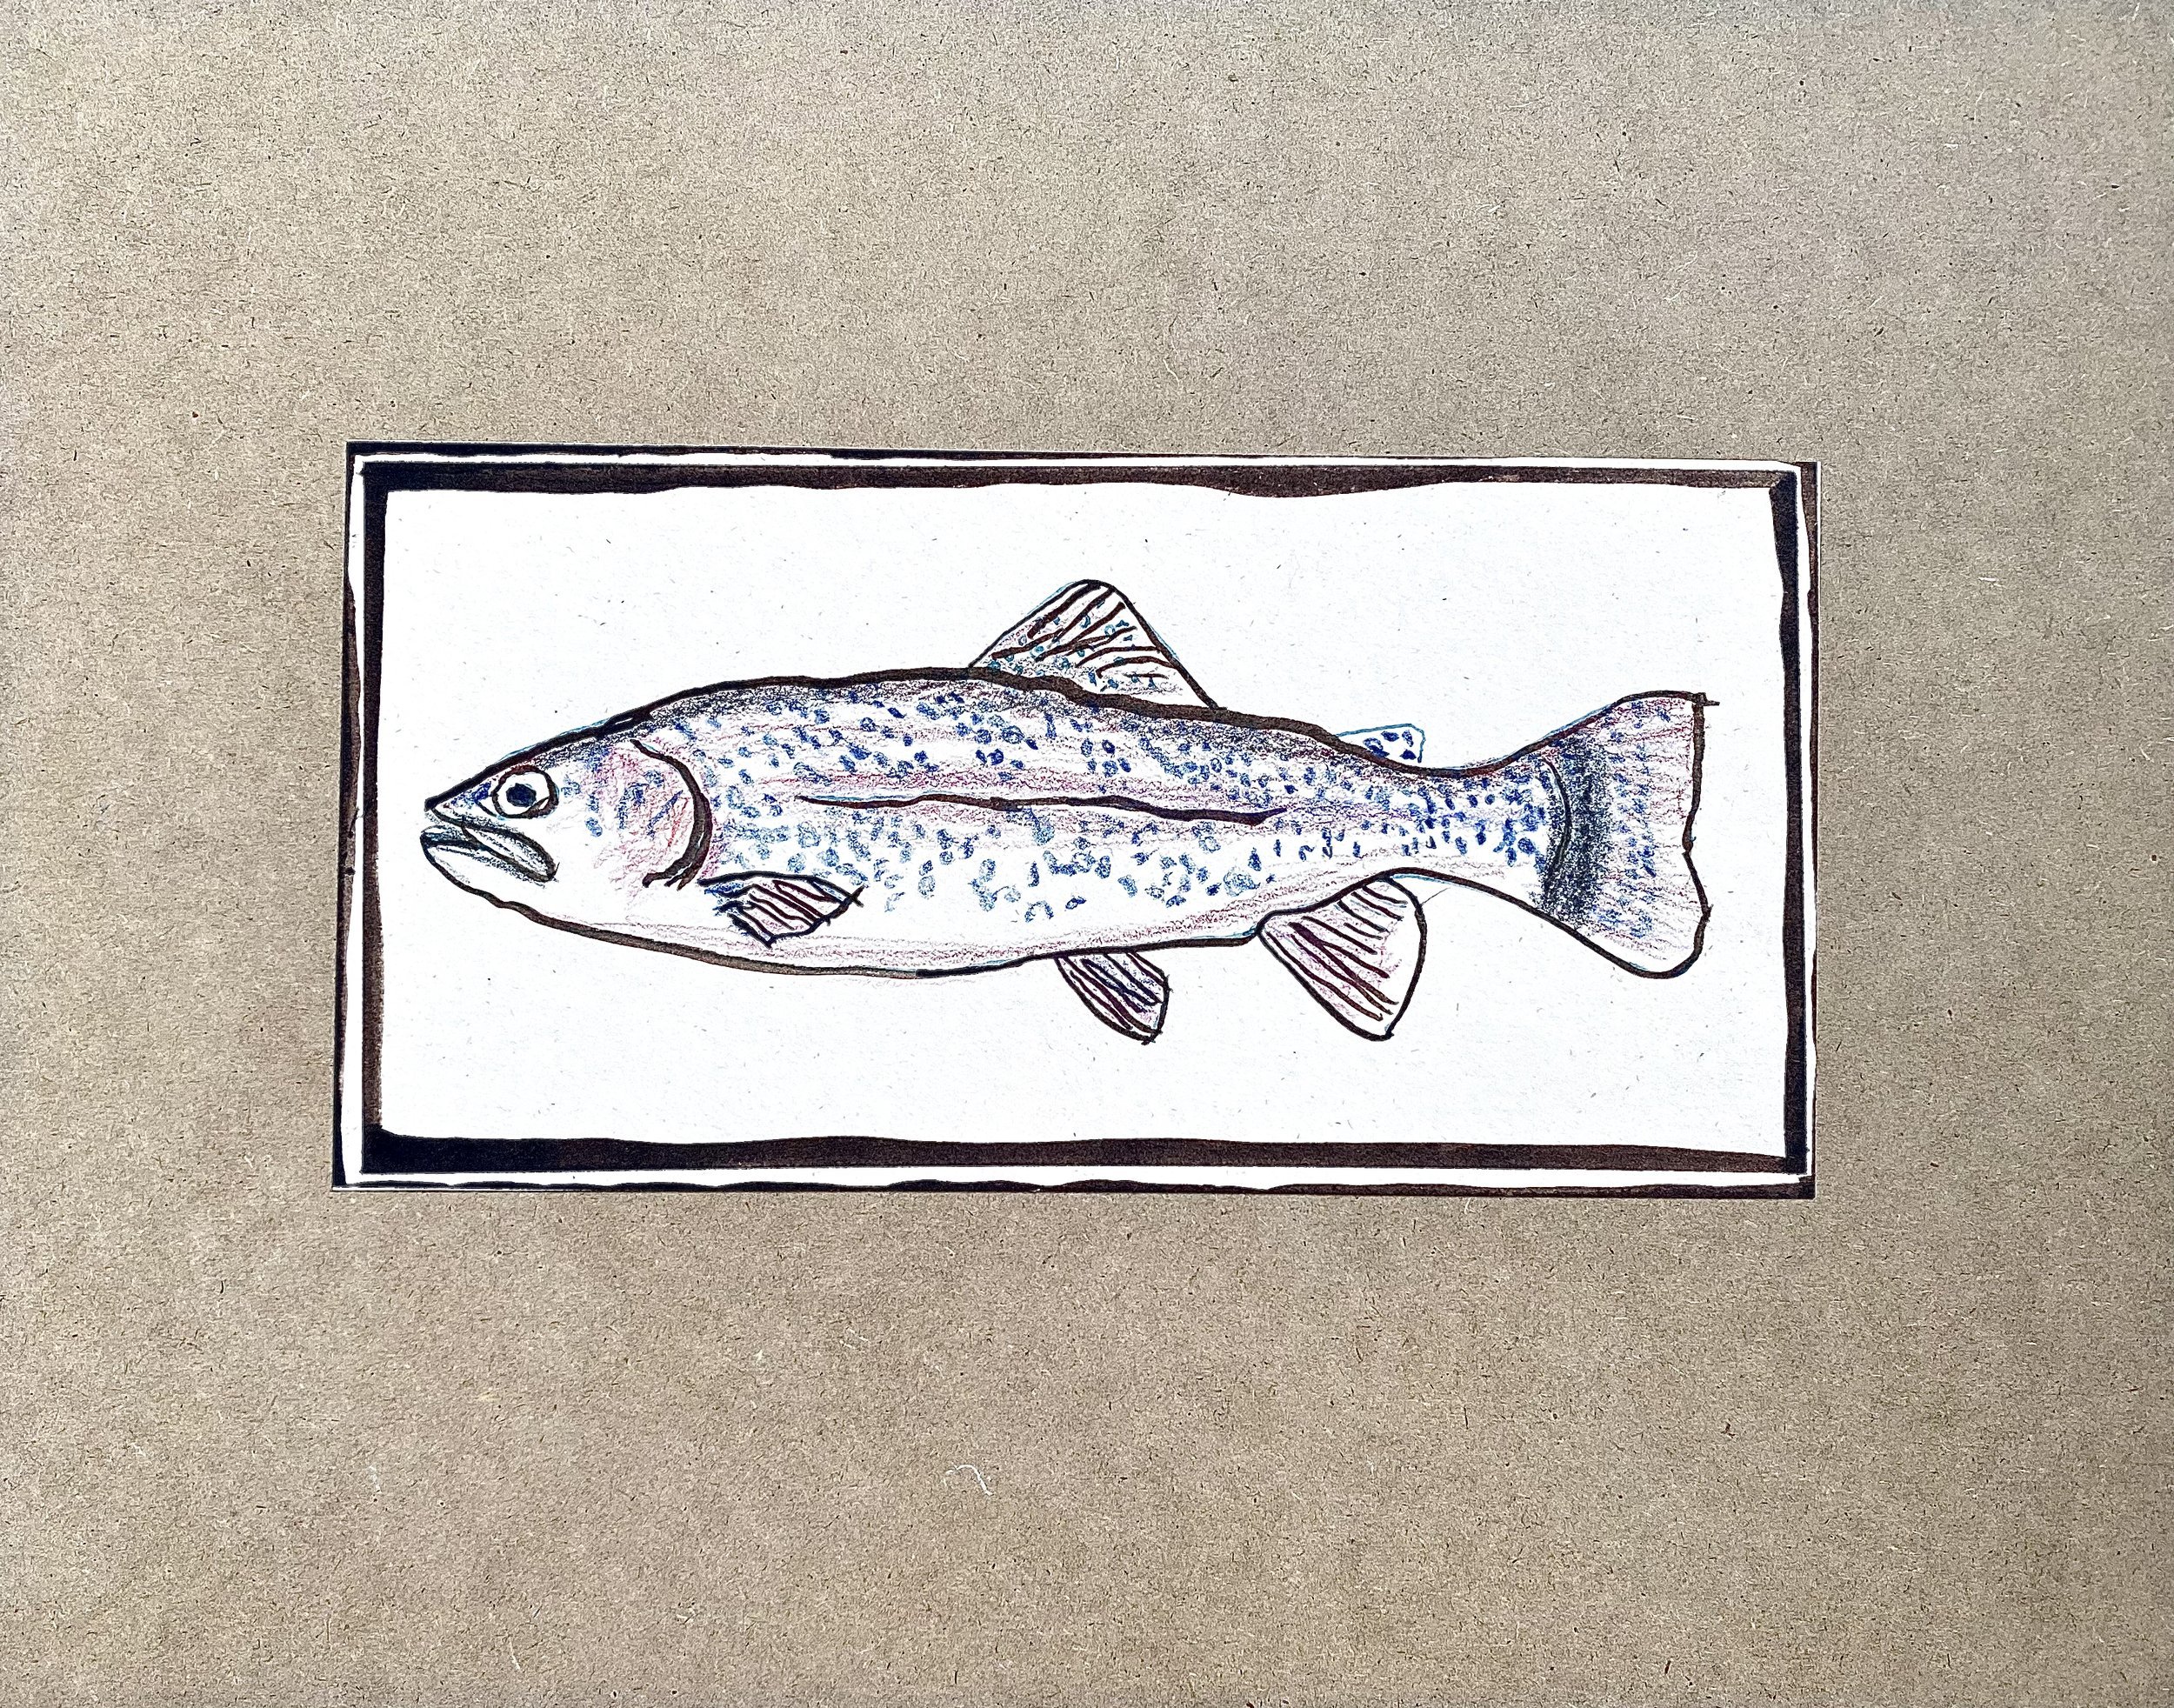 Fish+11%22+x+14%22+watercolor,+crayon+on+paper+and+cardboard.jpg